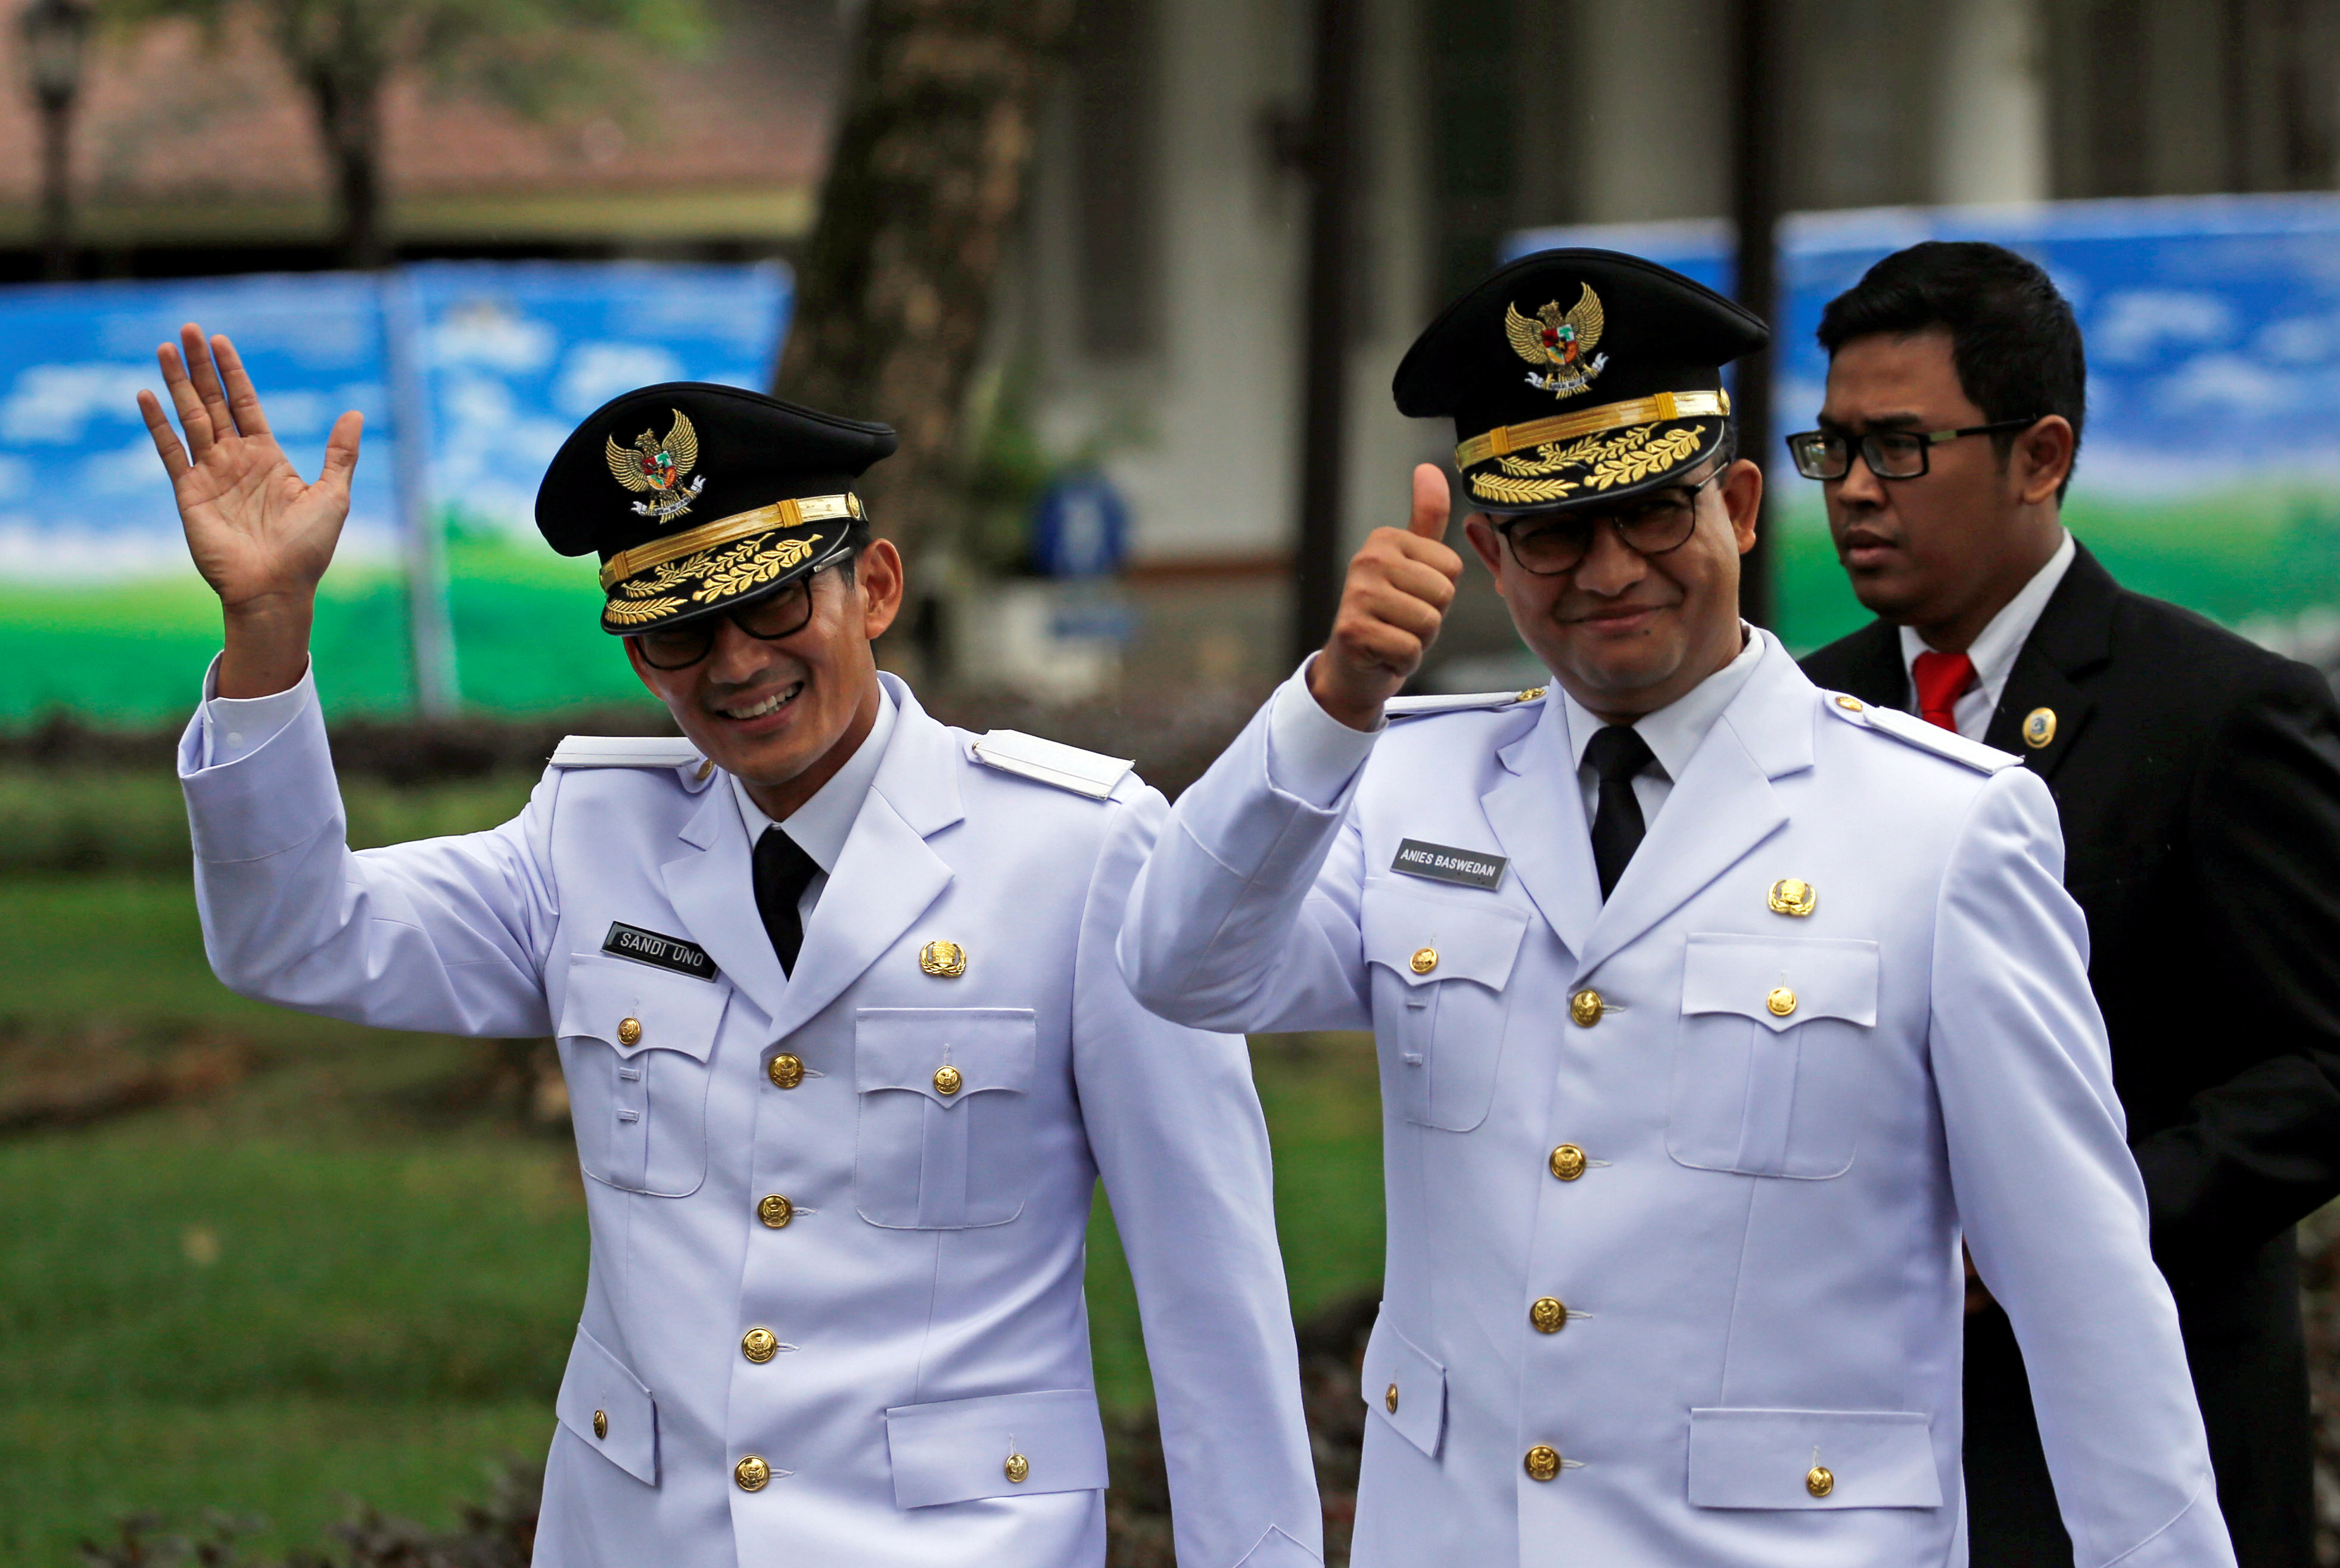 Jakarta Governor Anies Baswedan and his deputy Sandiaga Uno wave to reporters before a swearing-in at the Presidential Palace in Jakarta